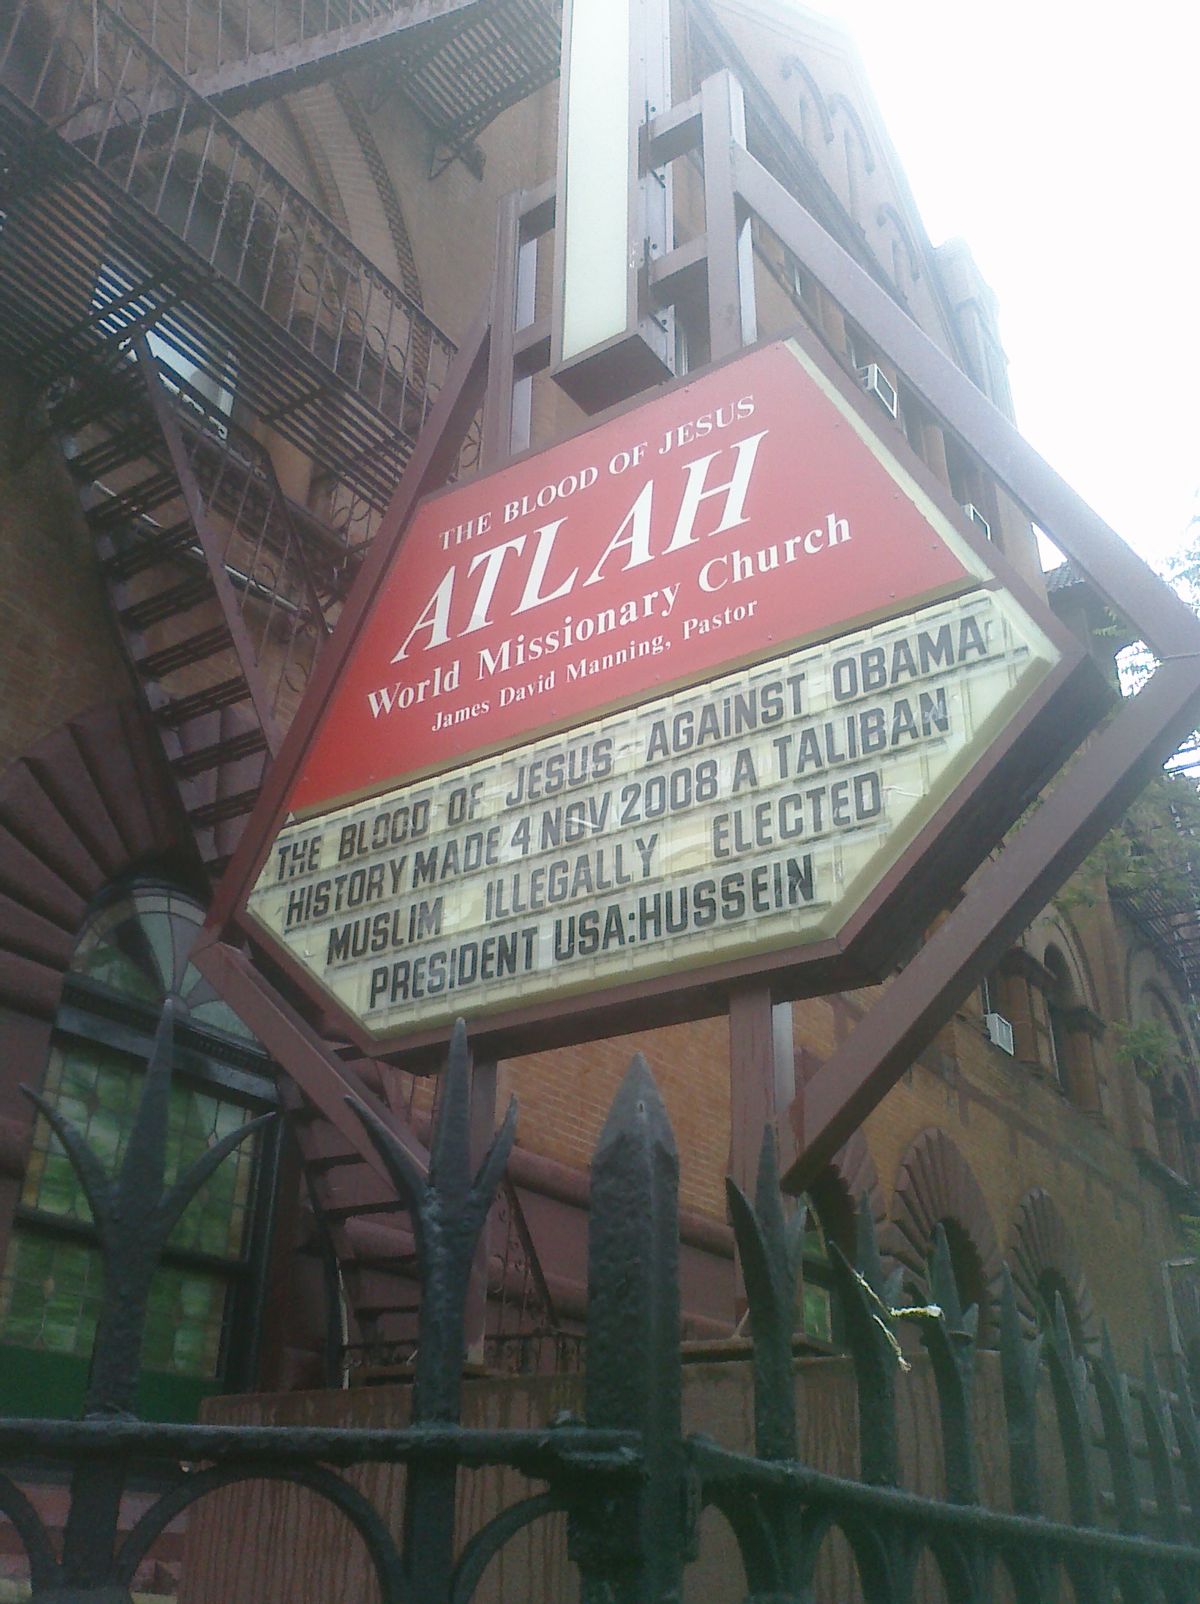 Outside the ATLAH World Missionary Church in Harlem, where Rev. James David Manning is putting President Obama "on trial" today.